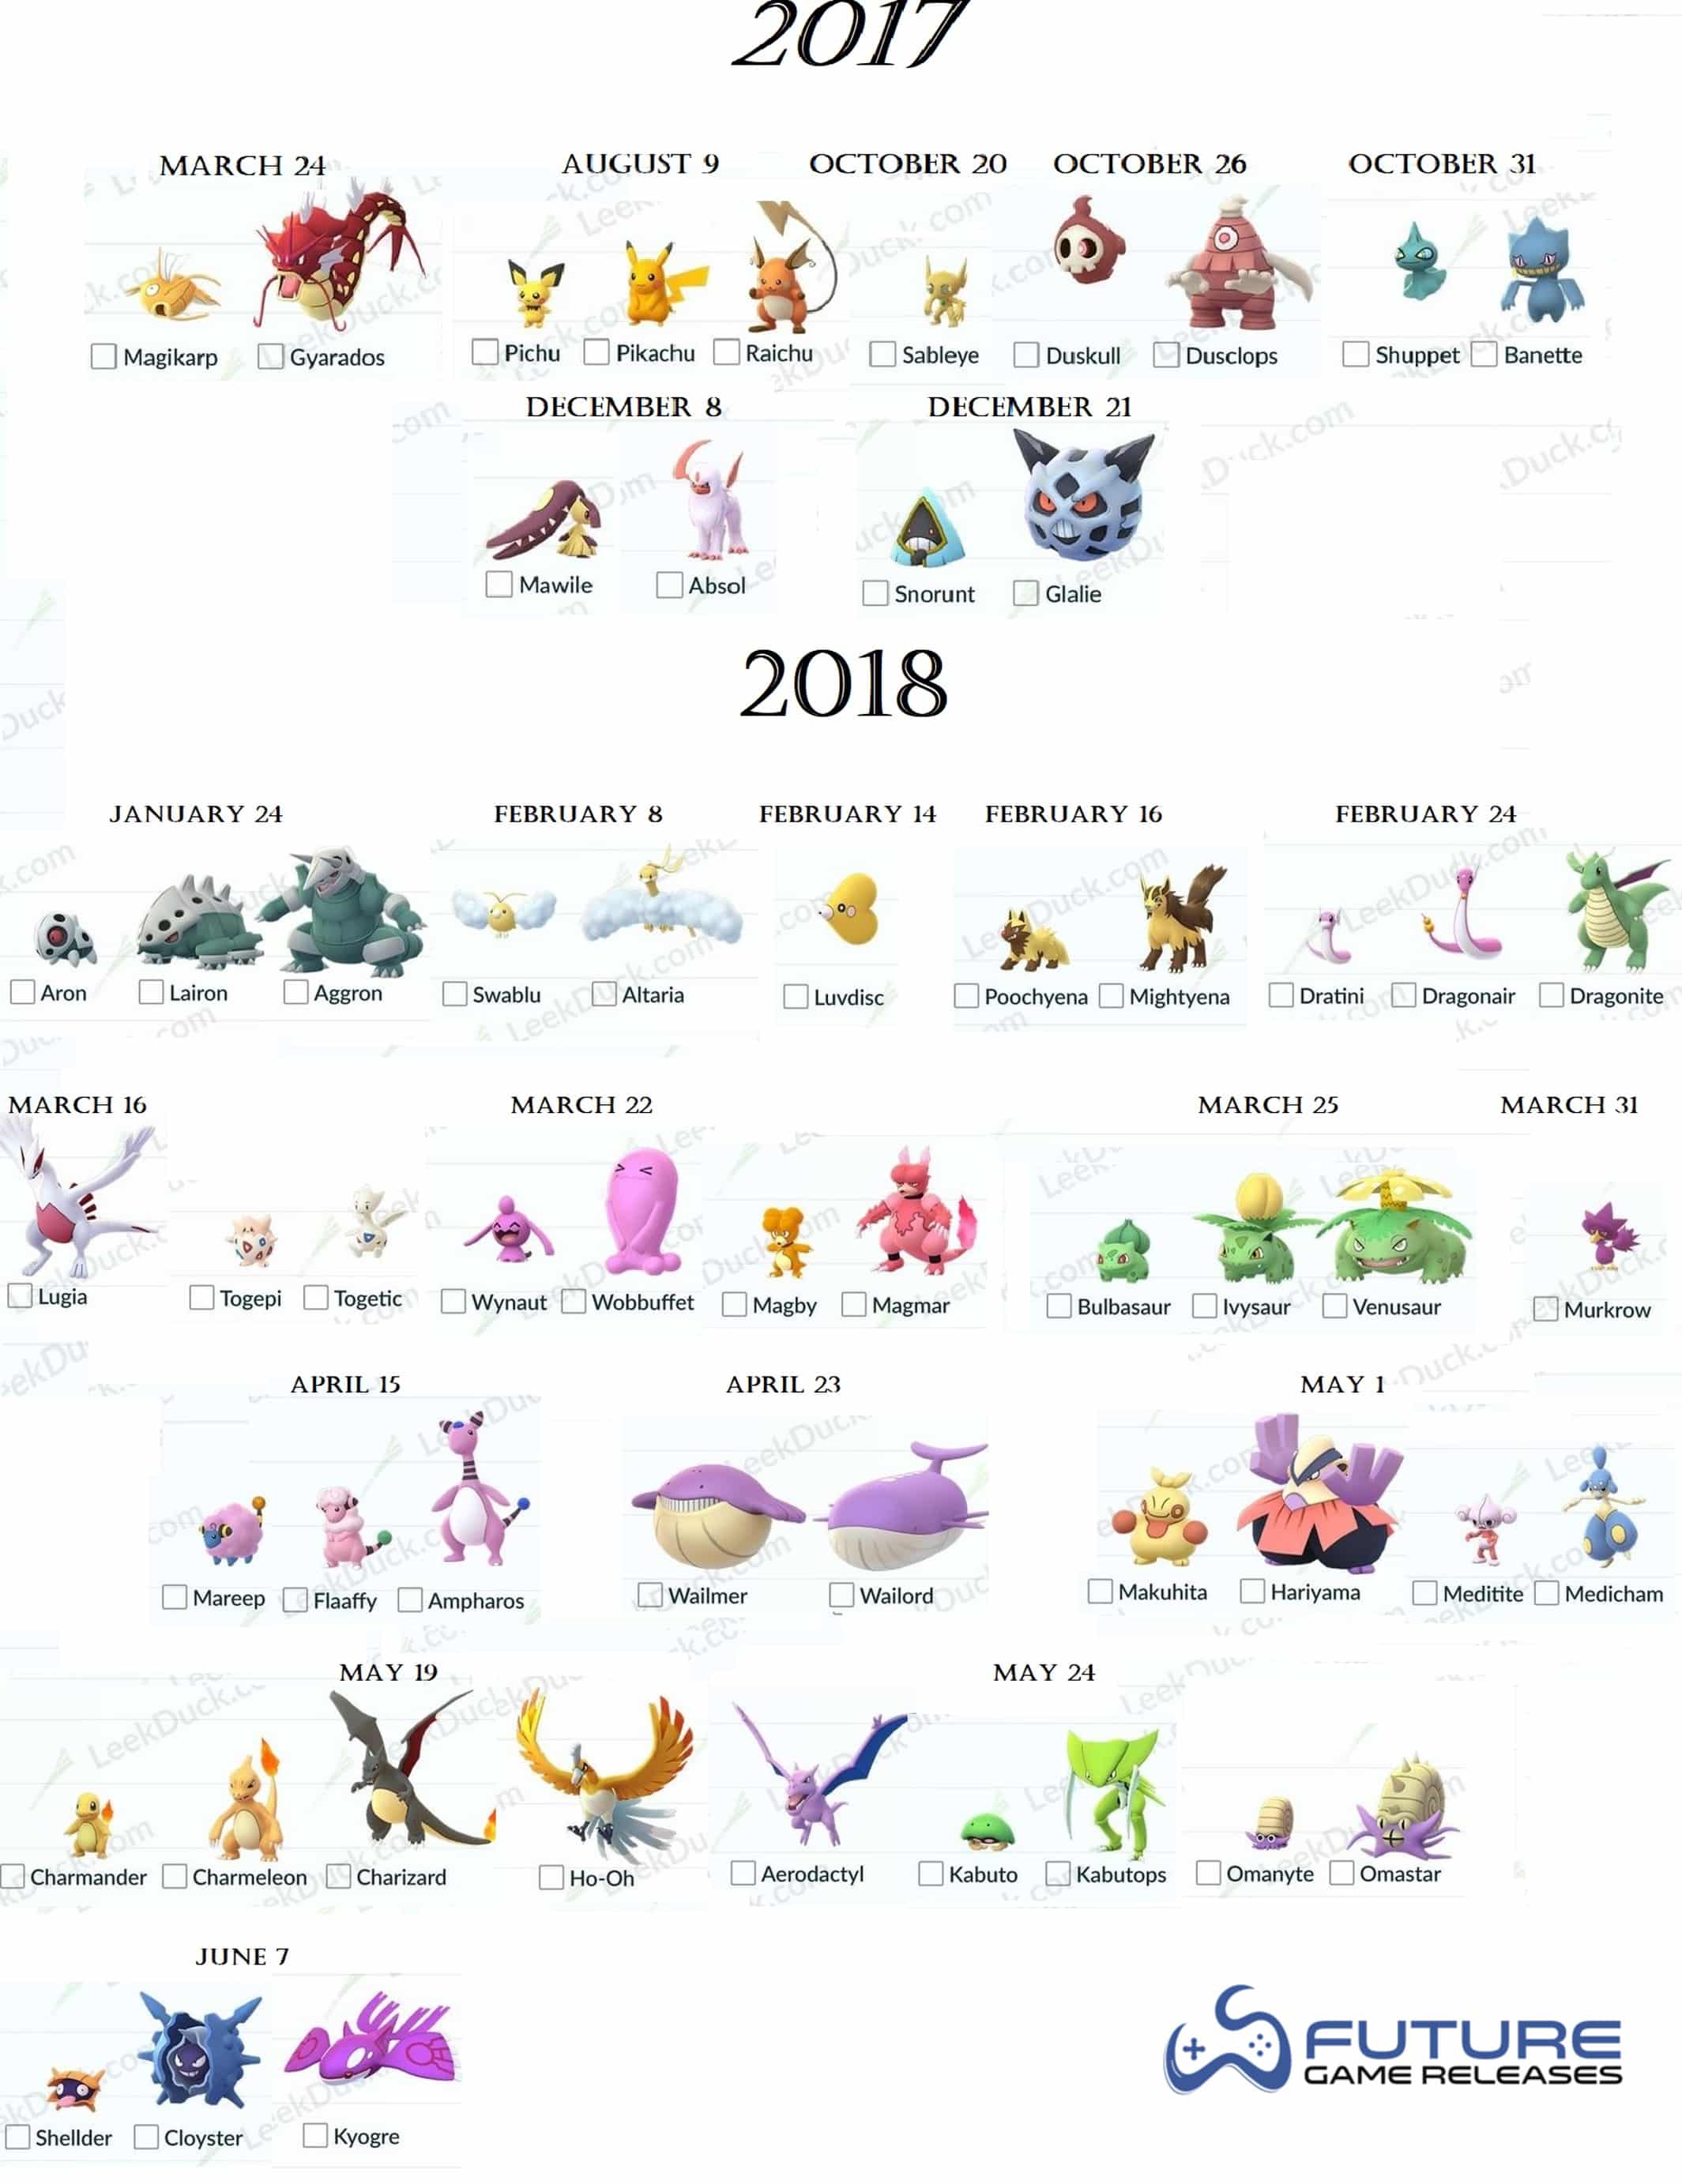 new-updated-list-of-all-shiny-pokemon-in-pokemon-go-dates-included-fgr